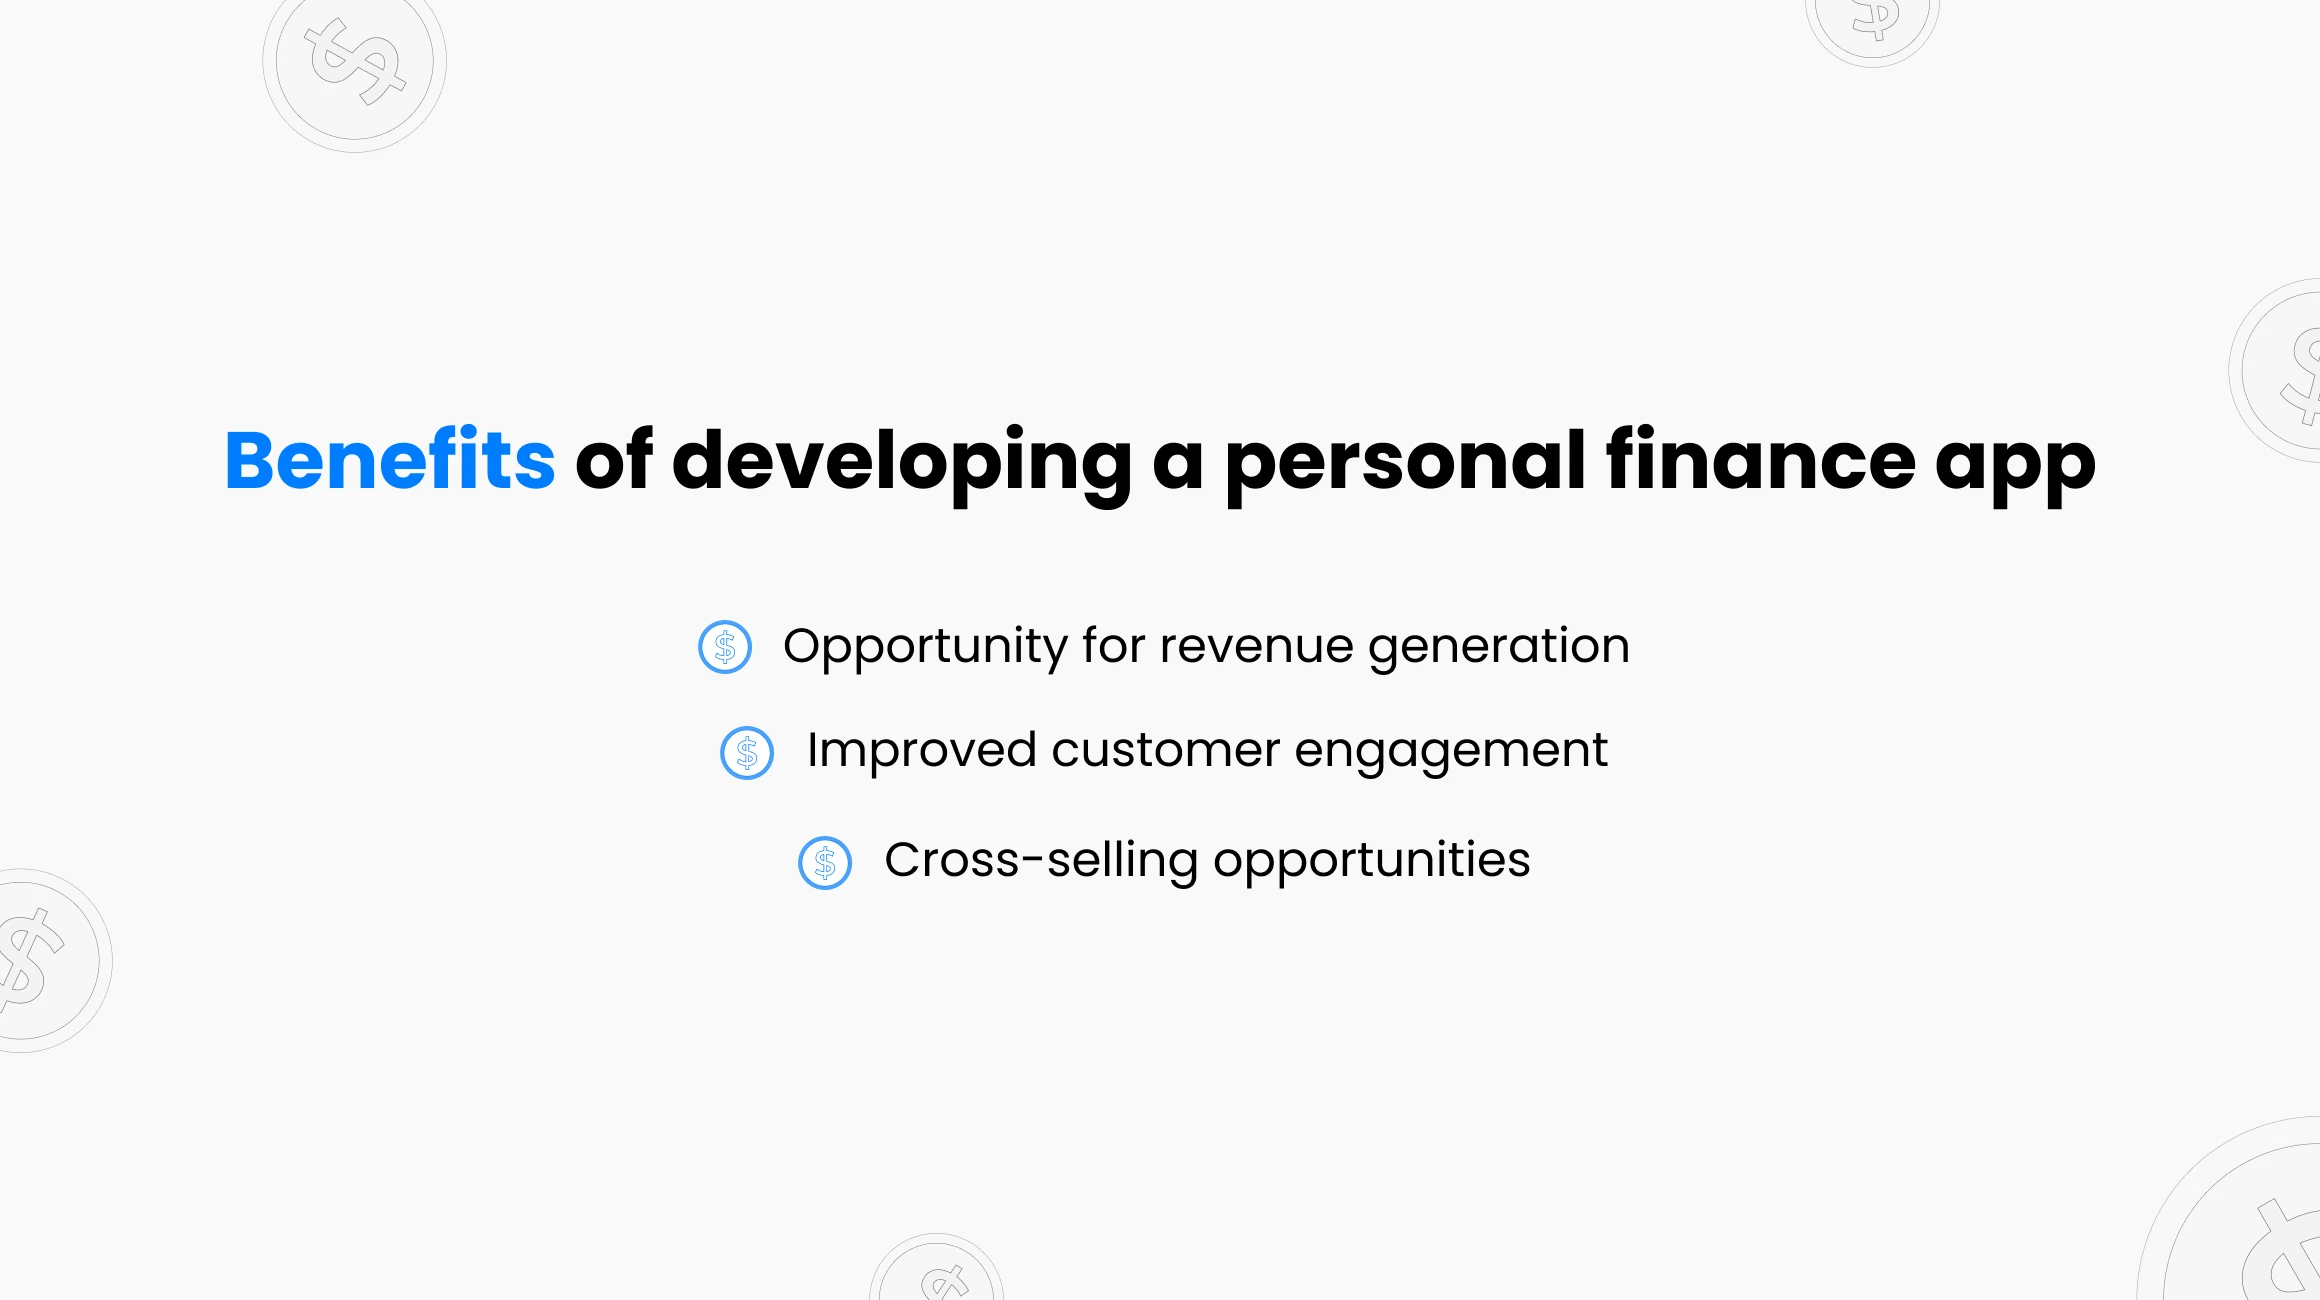 Benefits of developing a personal finance app